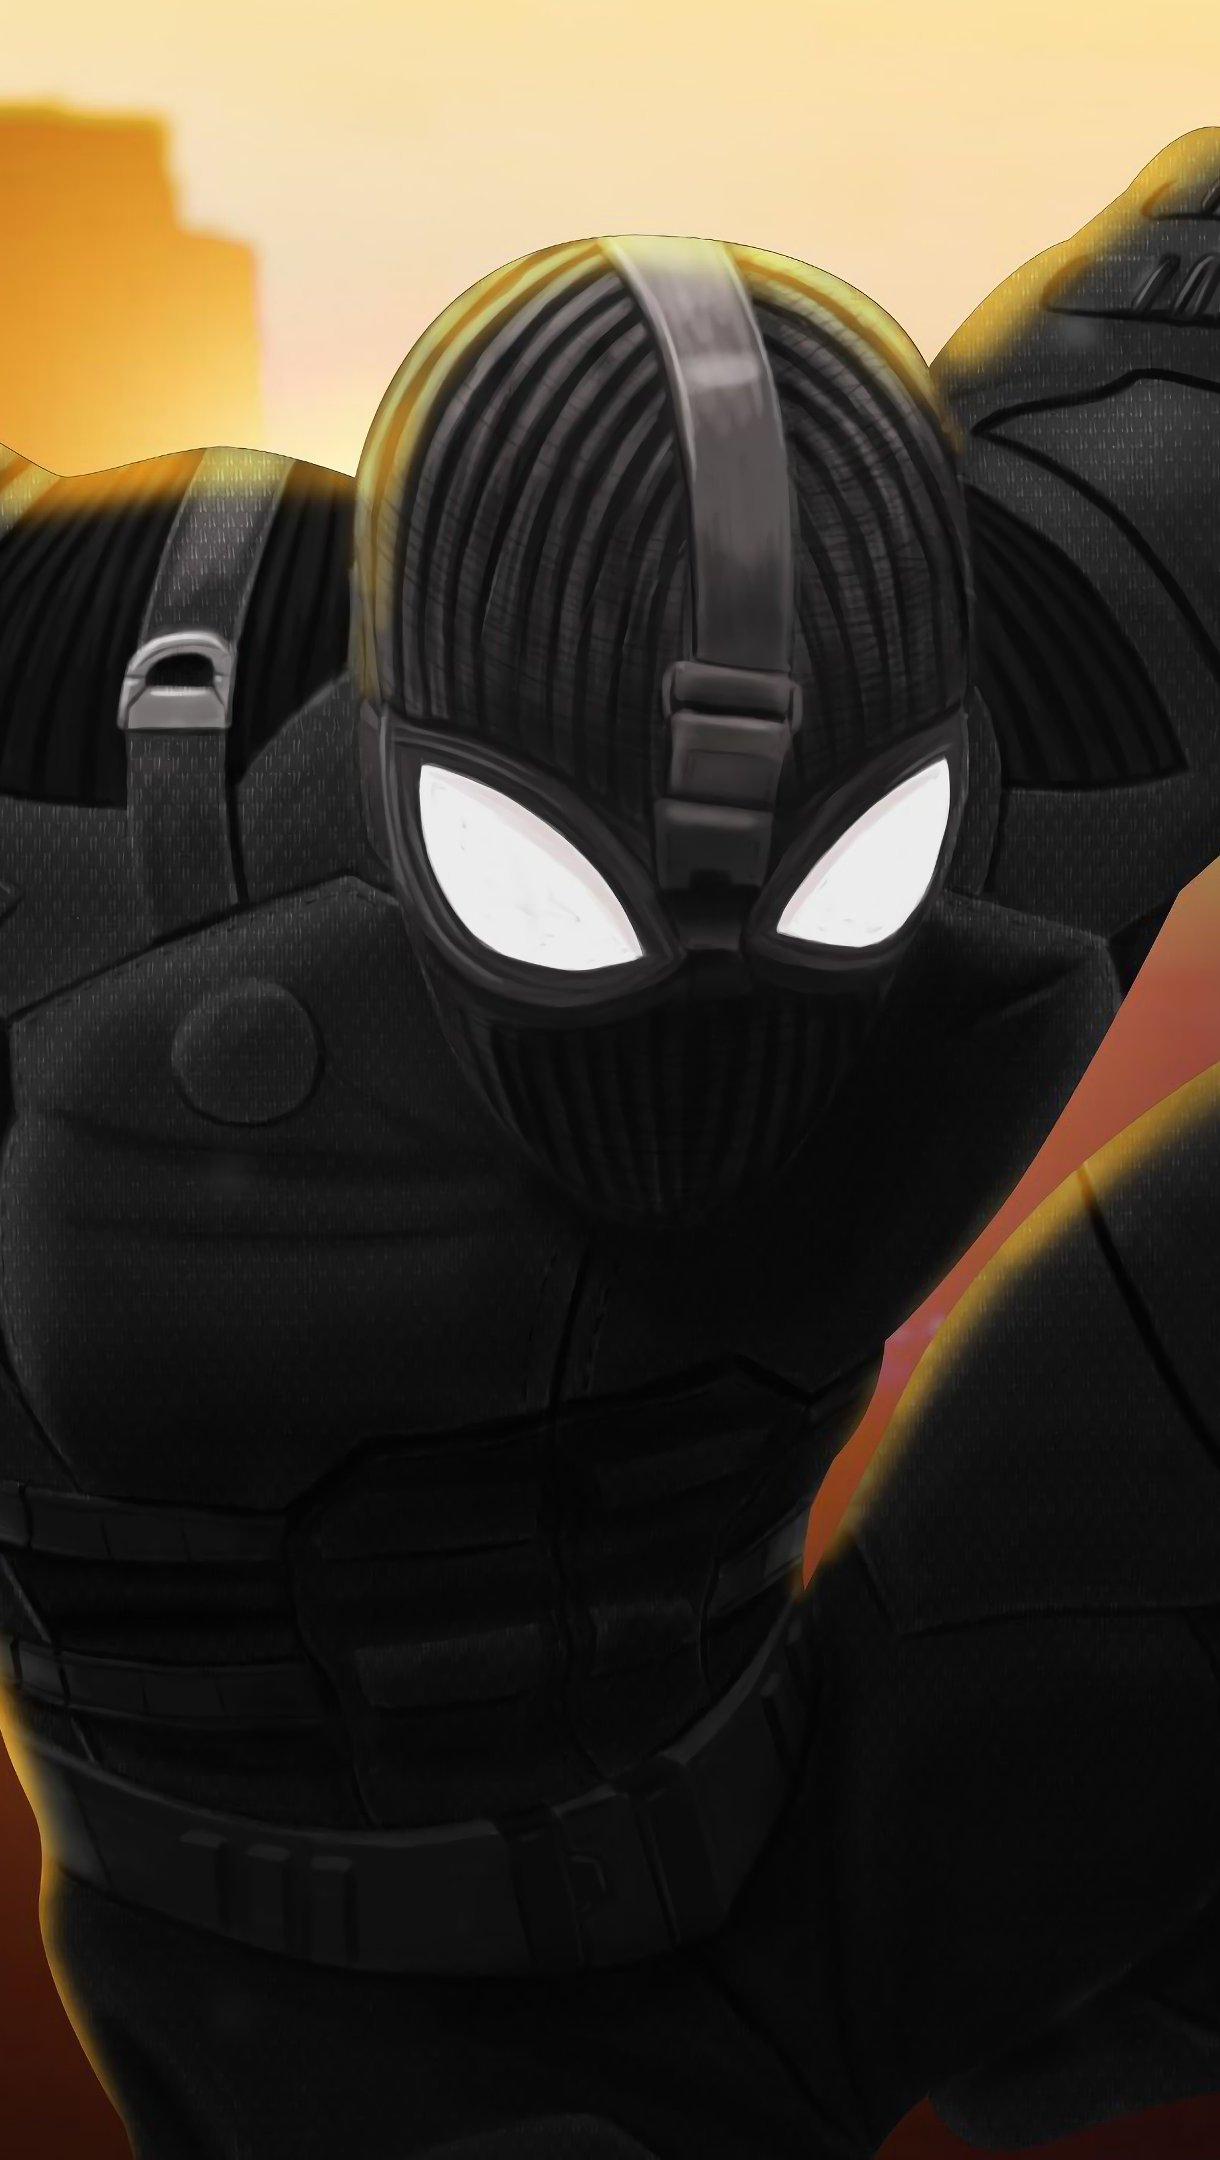 Wallpaper Spider-Man Far From Home Stealth Suit Vertical